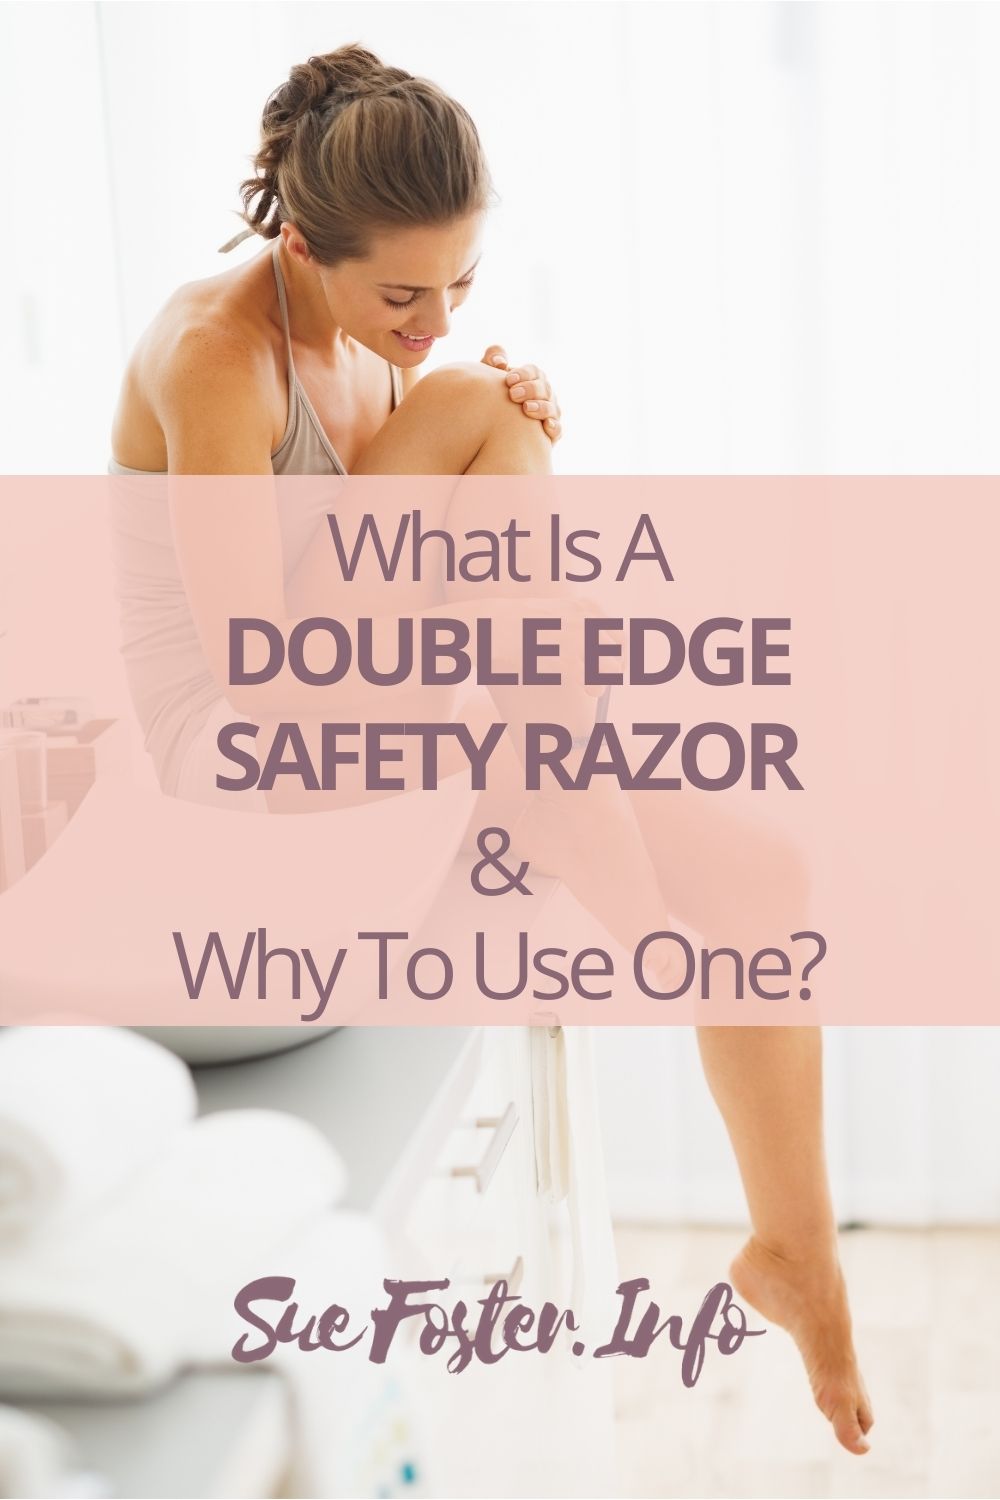 Here are three different types of DE safety razors with alternate methods for loading a razor blade